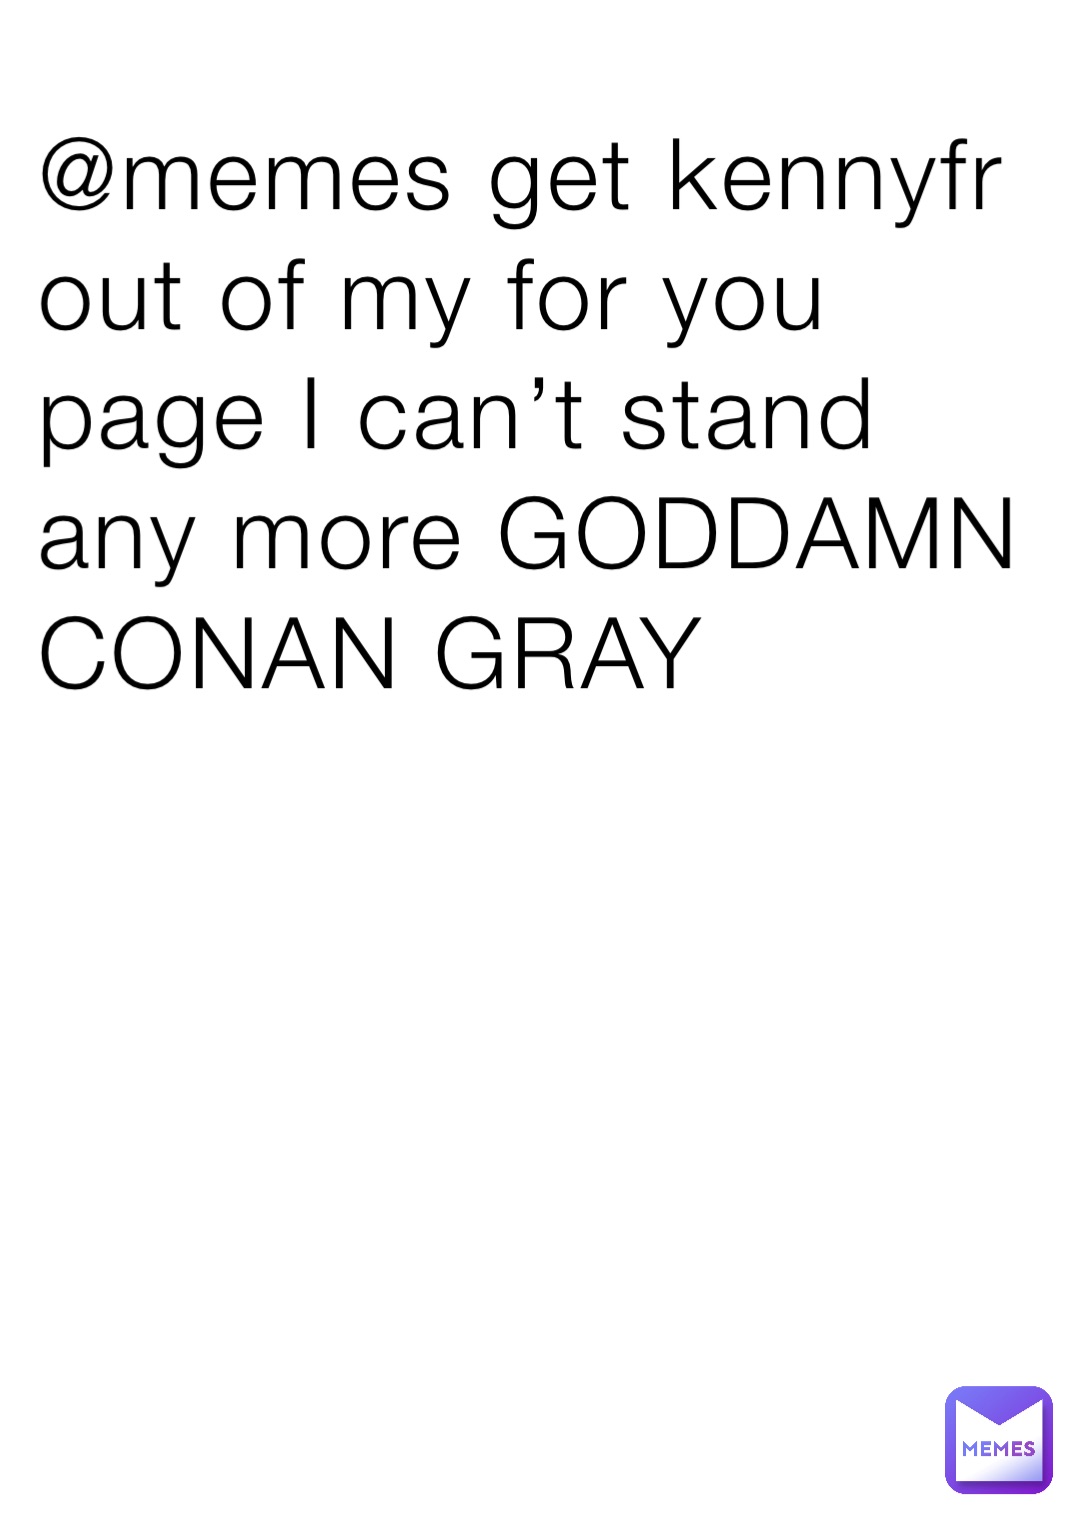 @memes get kennyfr out of my for you page I can’t stand any more GODDAMN CONAN GRAY